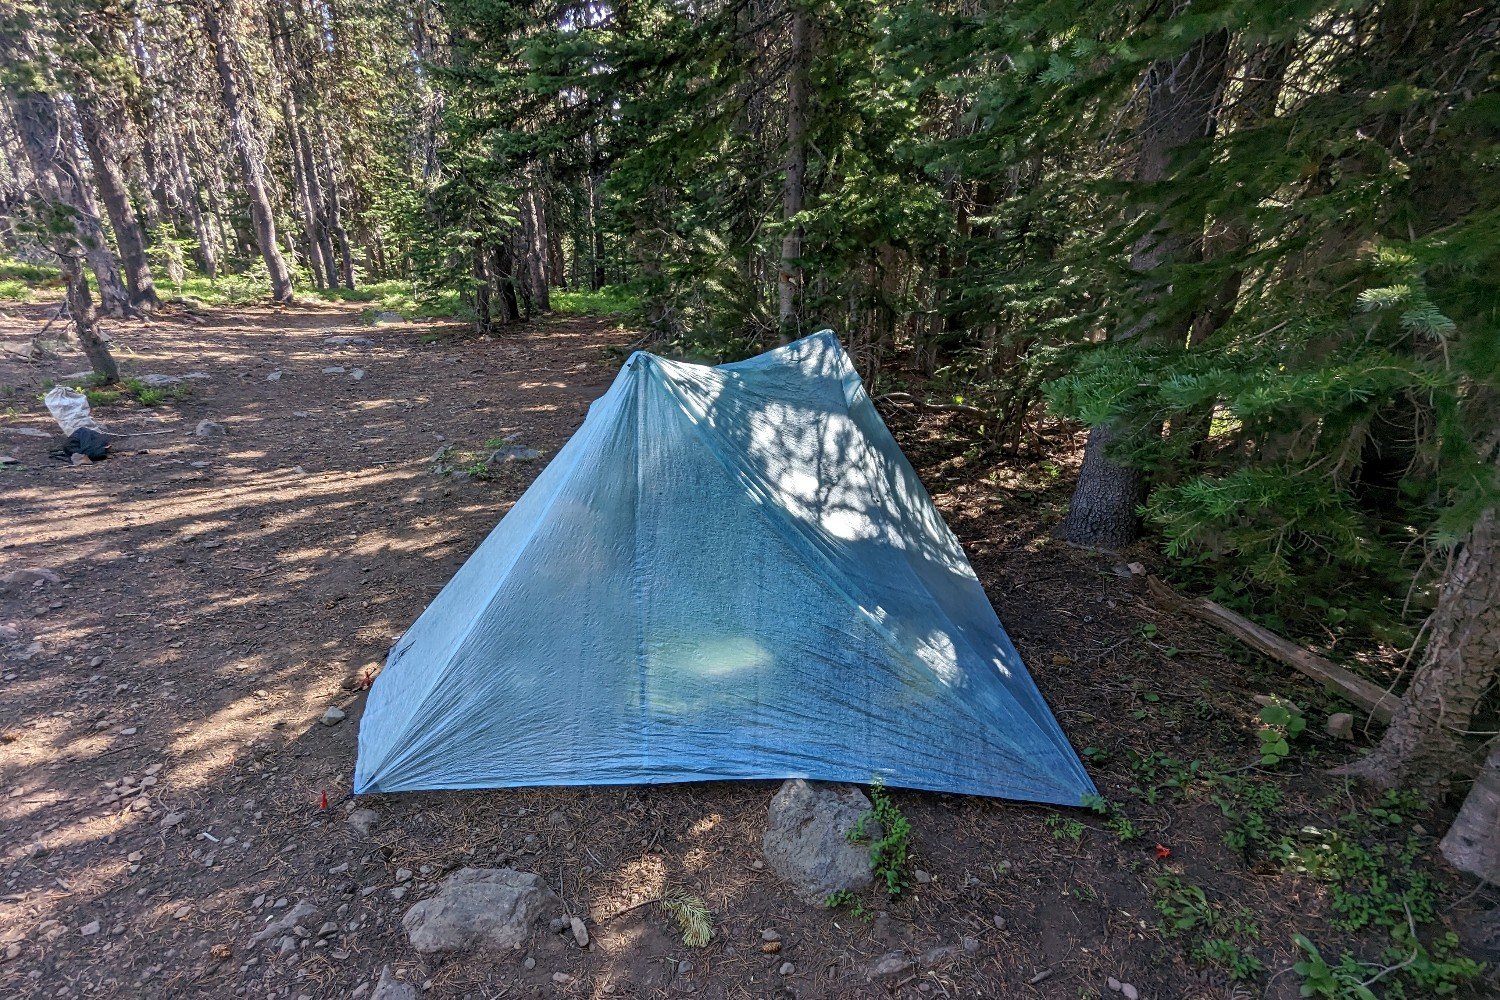 The Durston X-Mid 2 Pro tent set up in a forest campsite